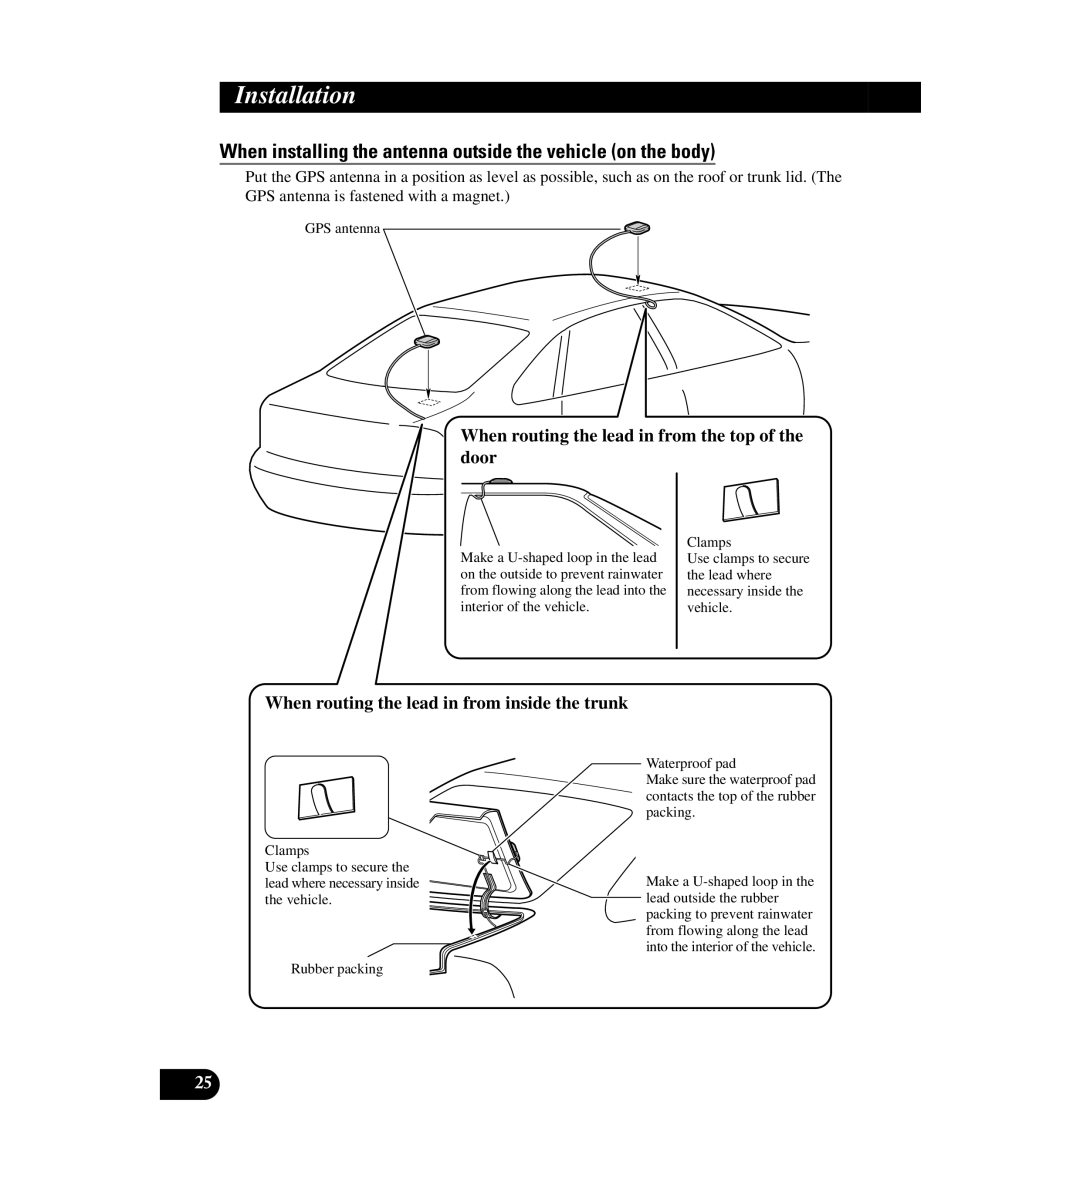 Digital Media AVIC-D1 installation manual When installing the antenna outside the vehicle on the body, Installation 